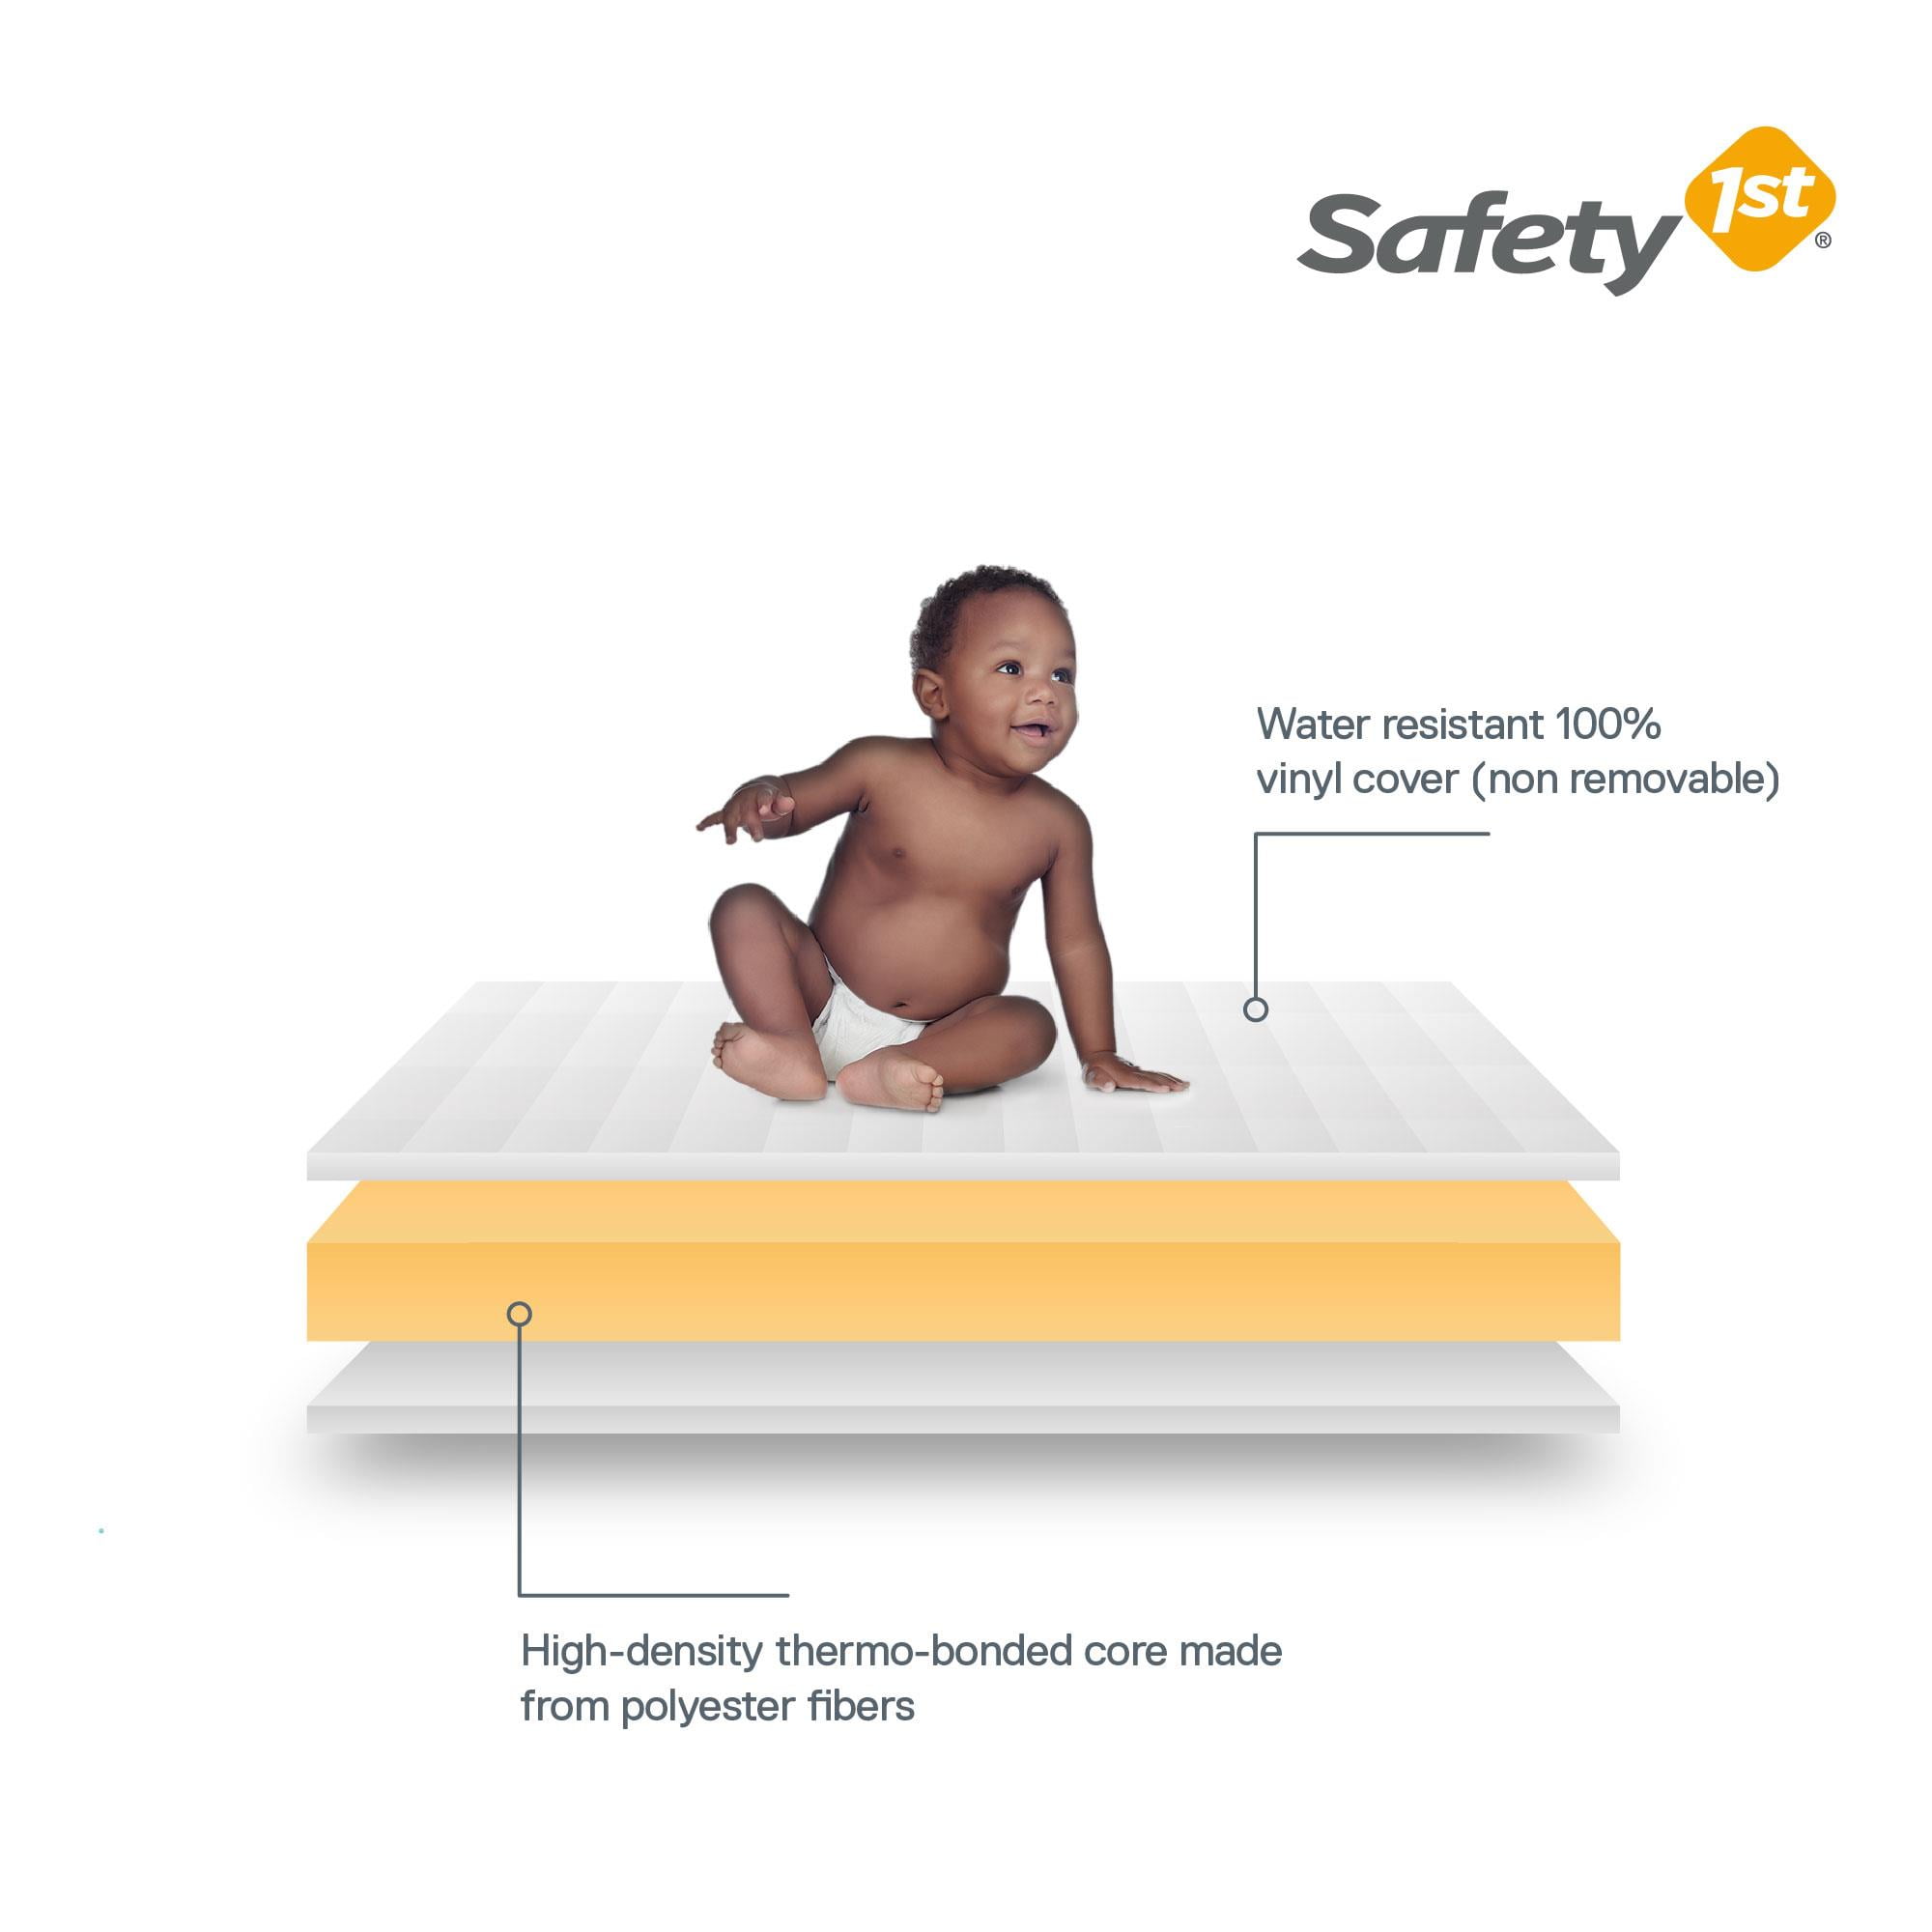 safety first grow with me 2 in 1 mattress review